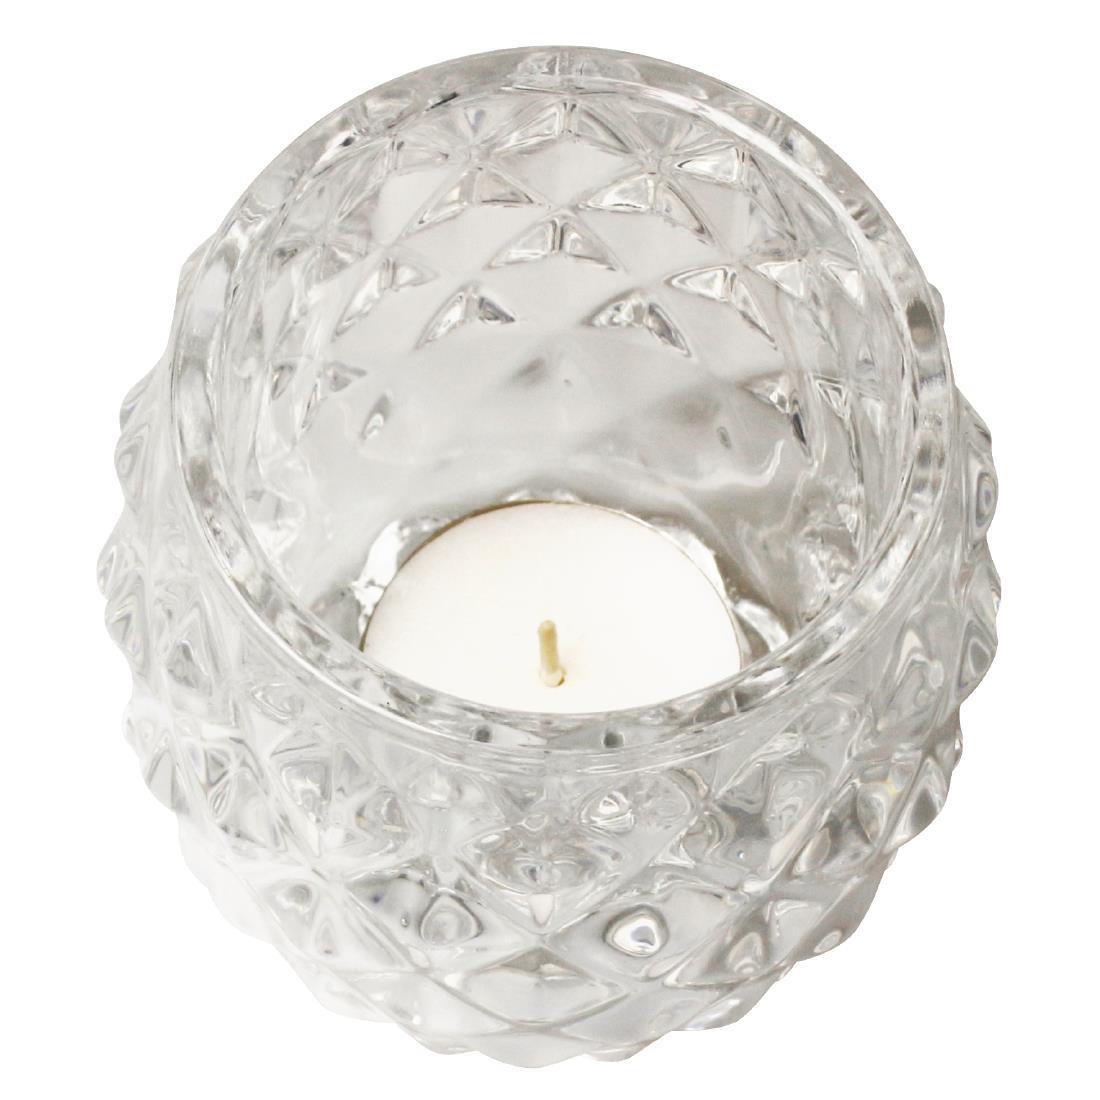 Olympia Glass Diamond Tealight Holder Clear 75mm (Pack of 6) - GM227  - 2